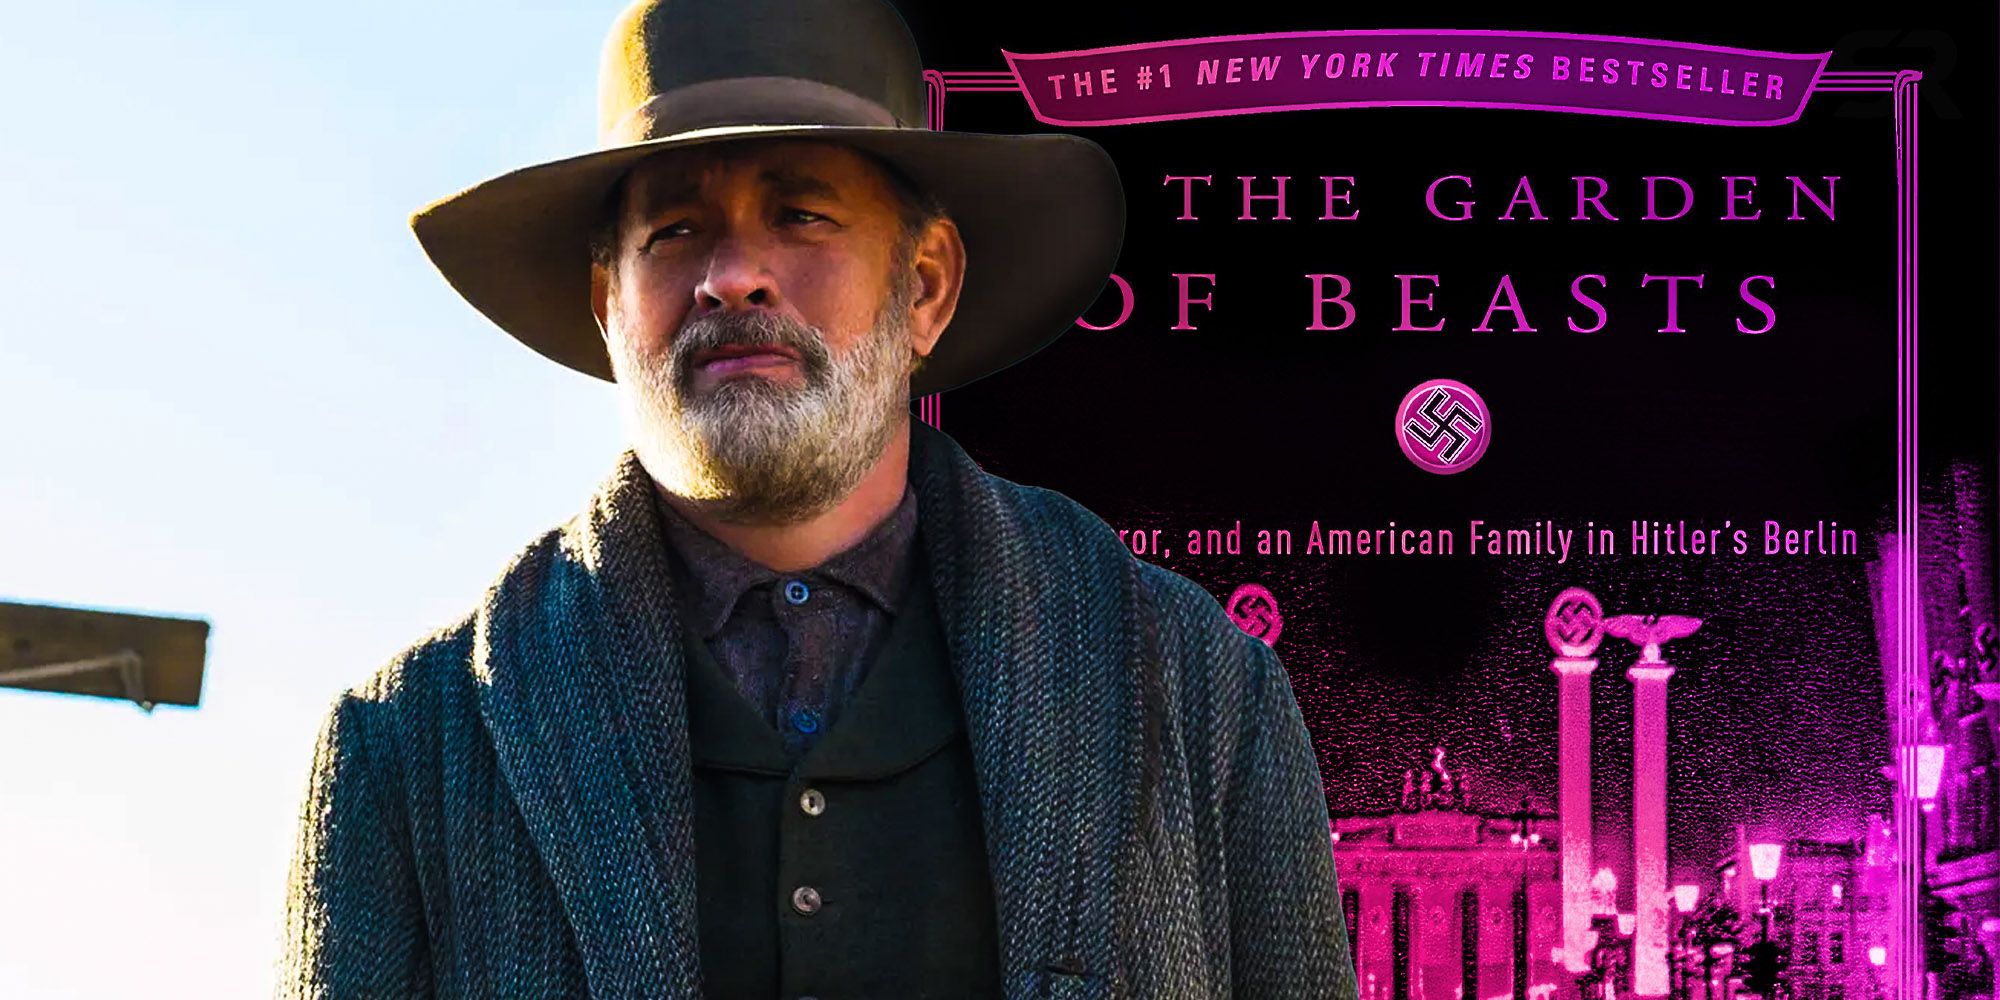 upcoming tom hanks movies in the garden of beasts